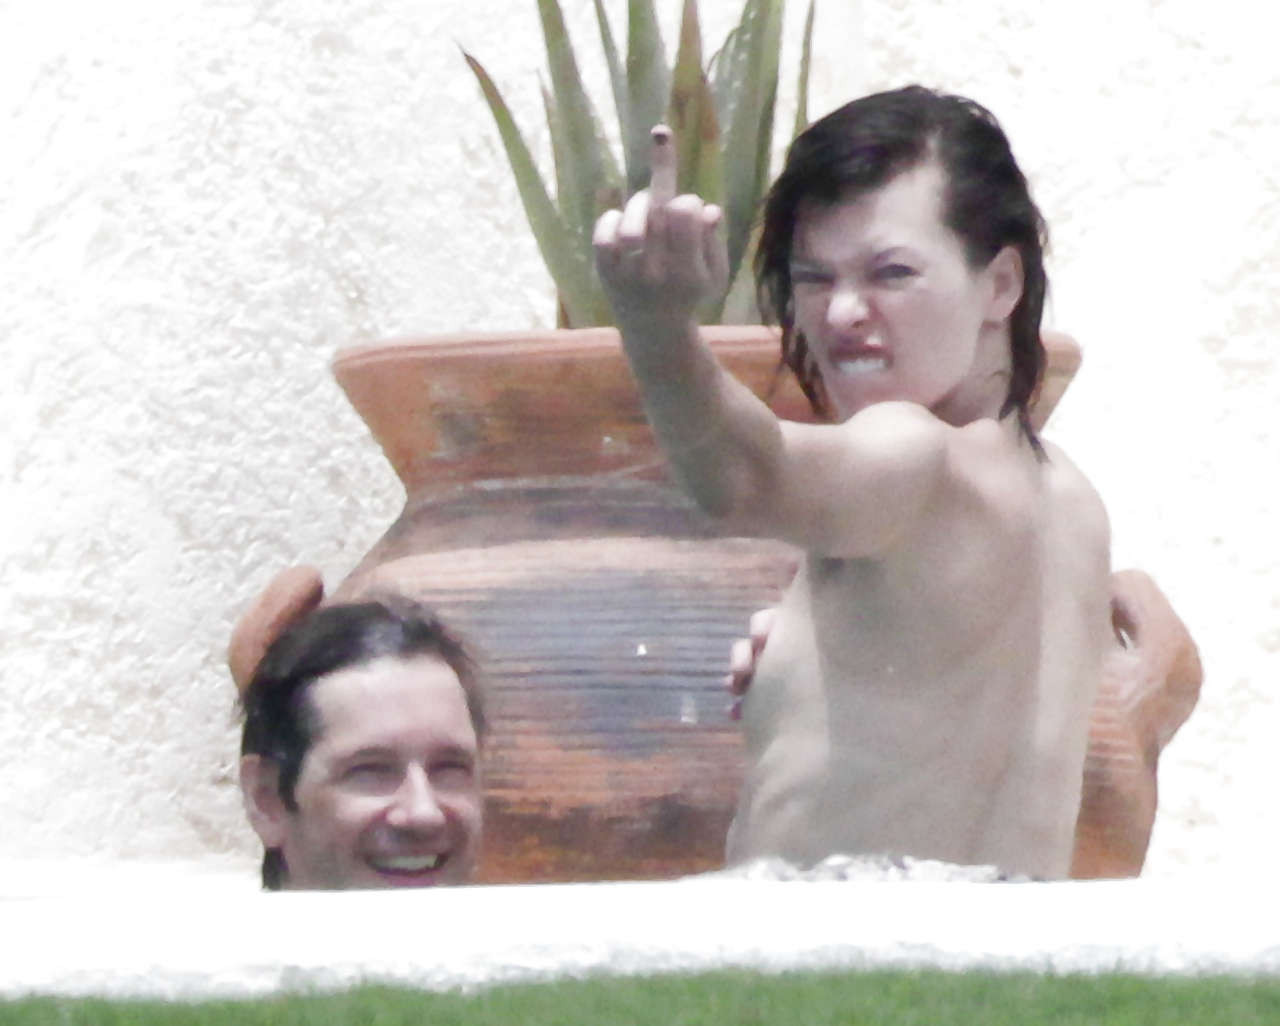 Milla Jovovich caught topless in pool by paparazzi and giving them middle finger #75289820